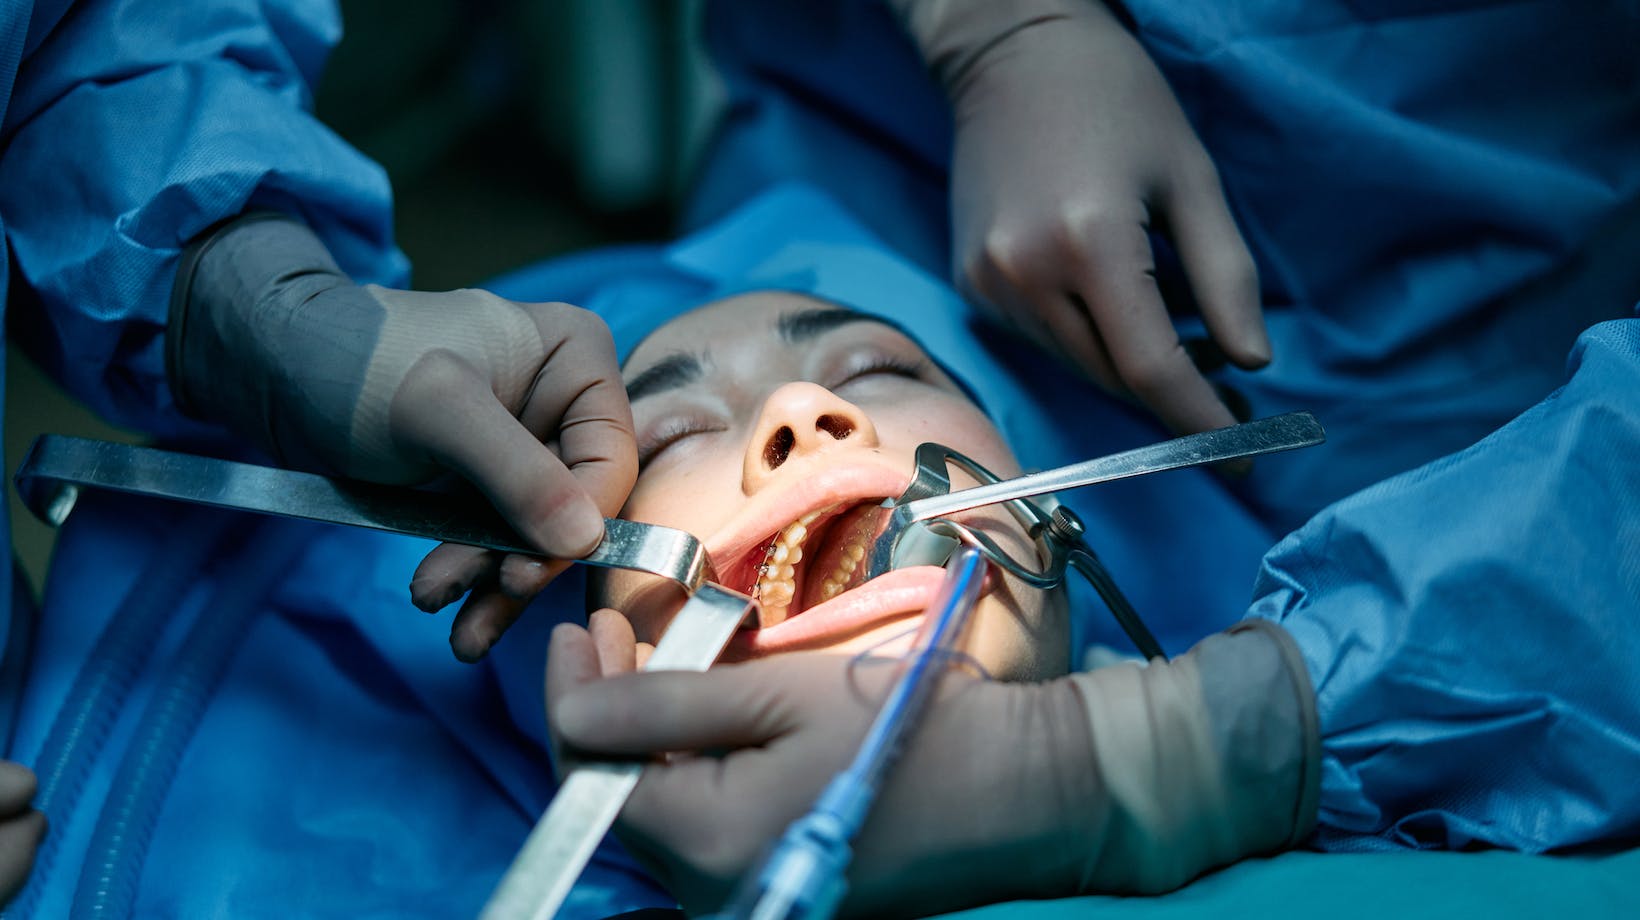 during four handed dentistry the operator must have